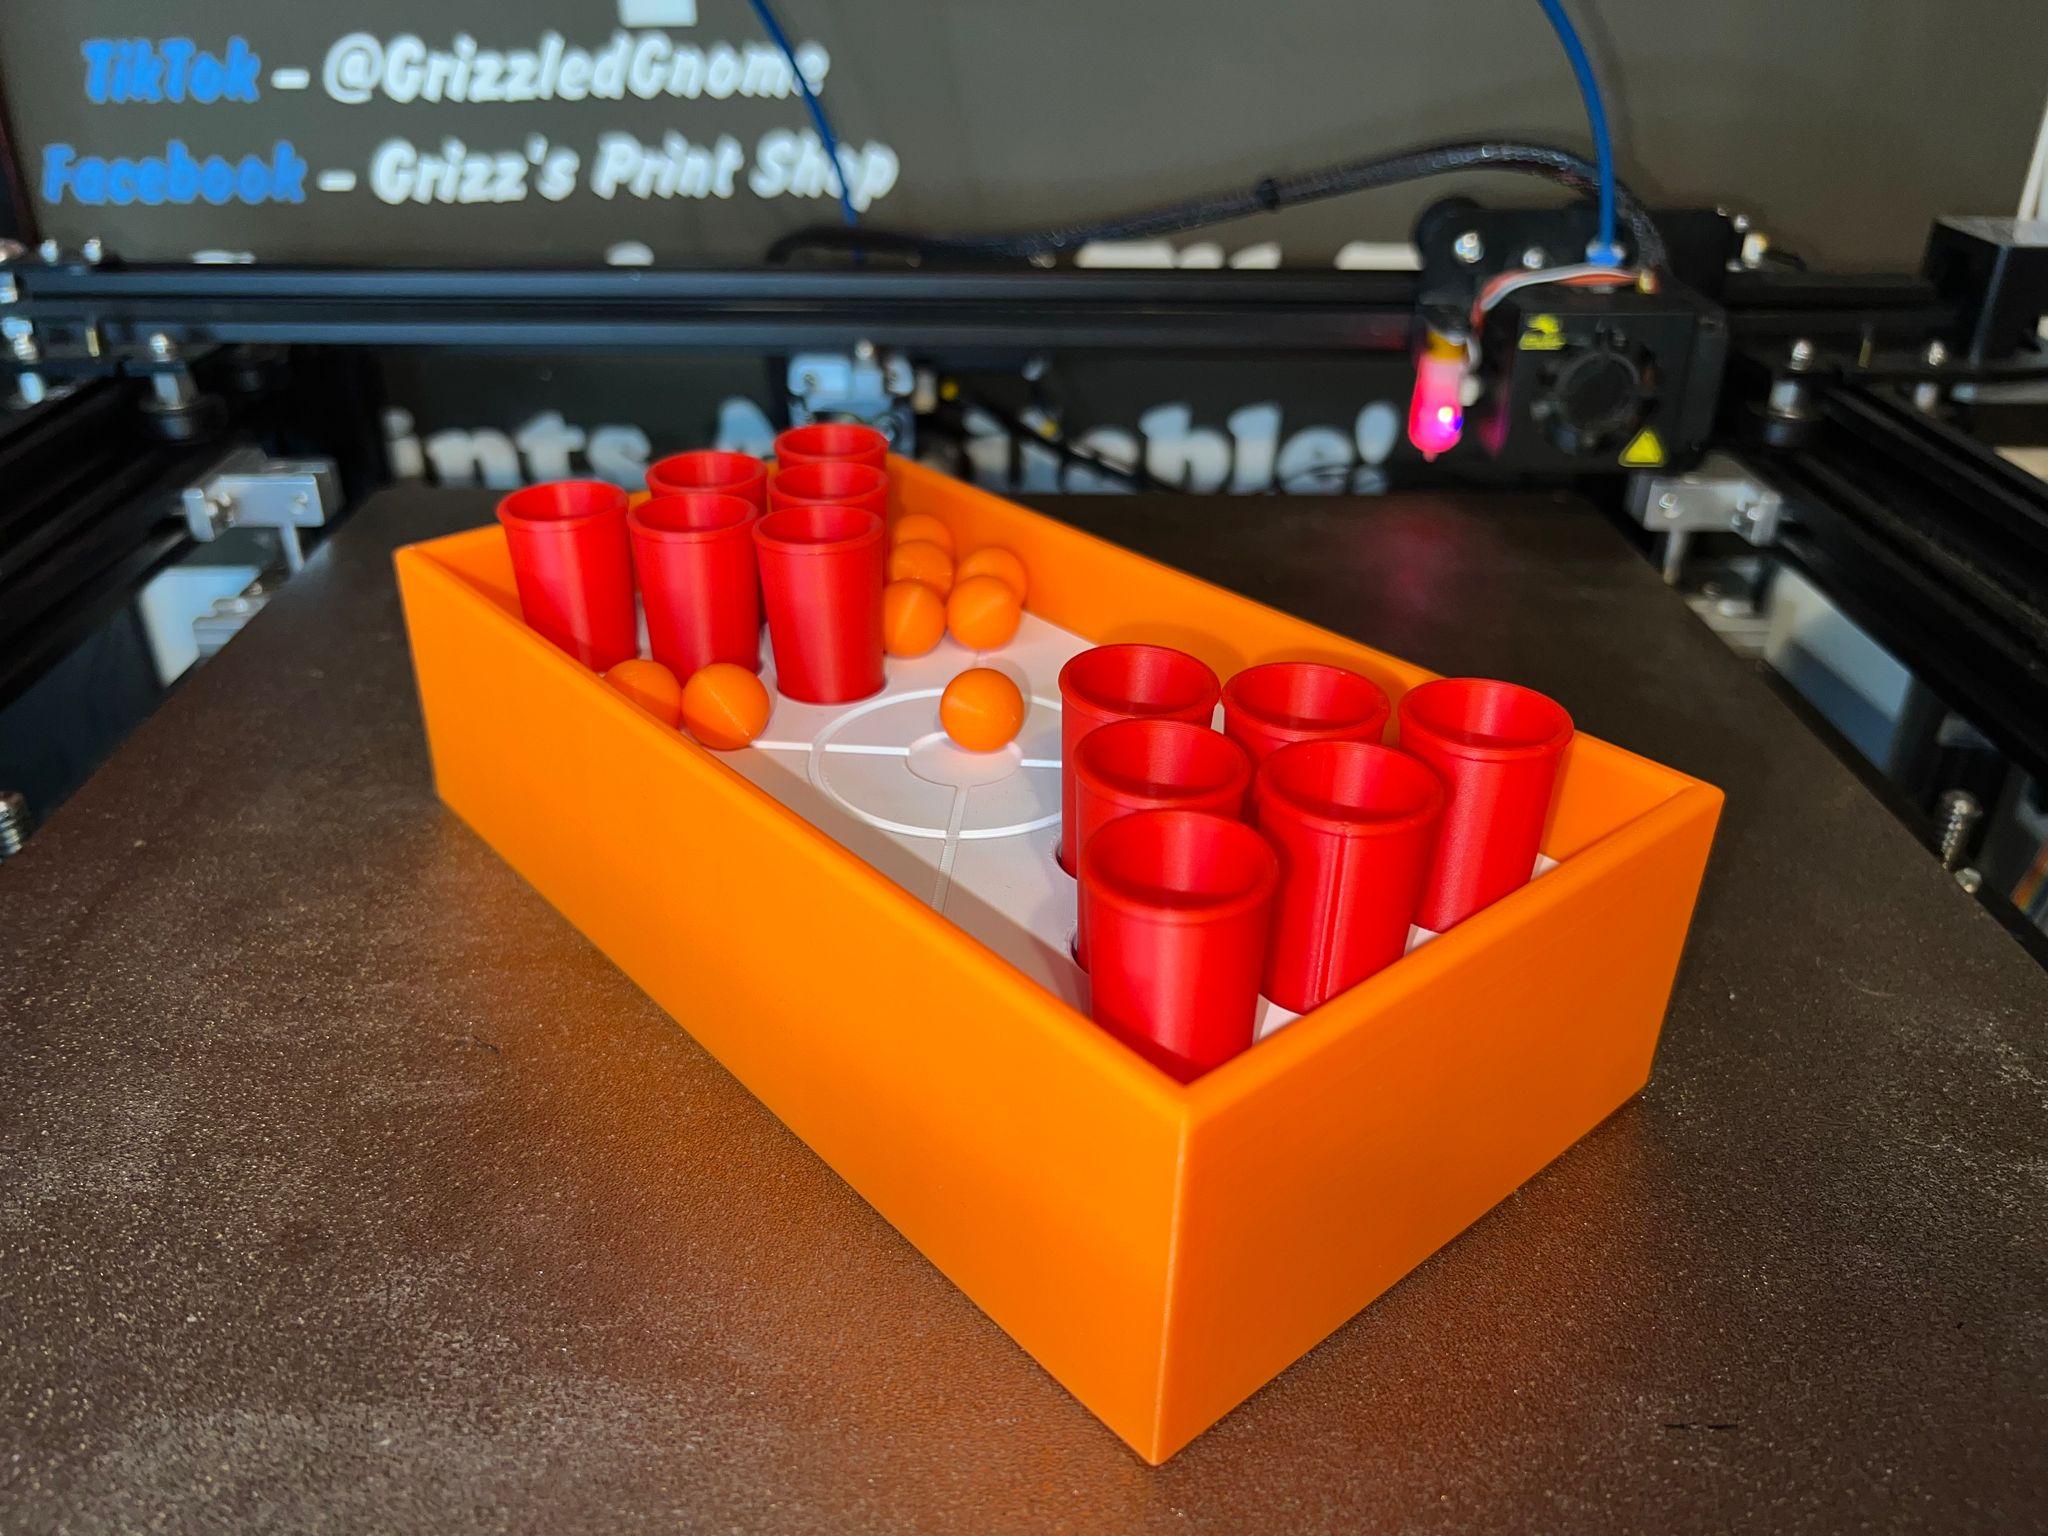 Print Pong tabletop pong game - Print in Place 3d model